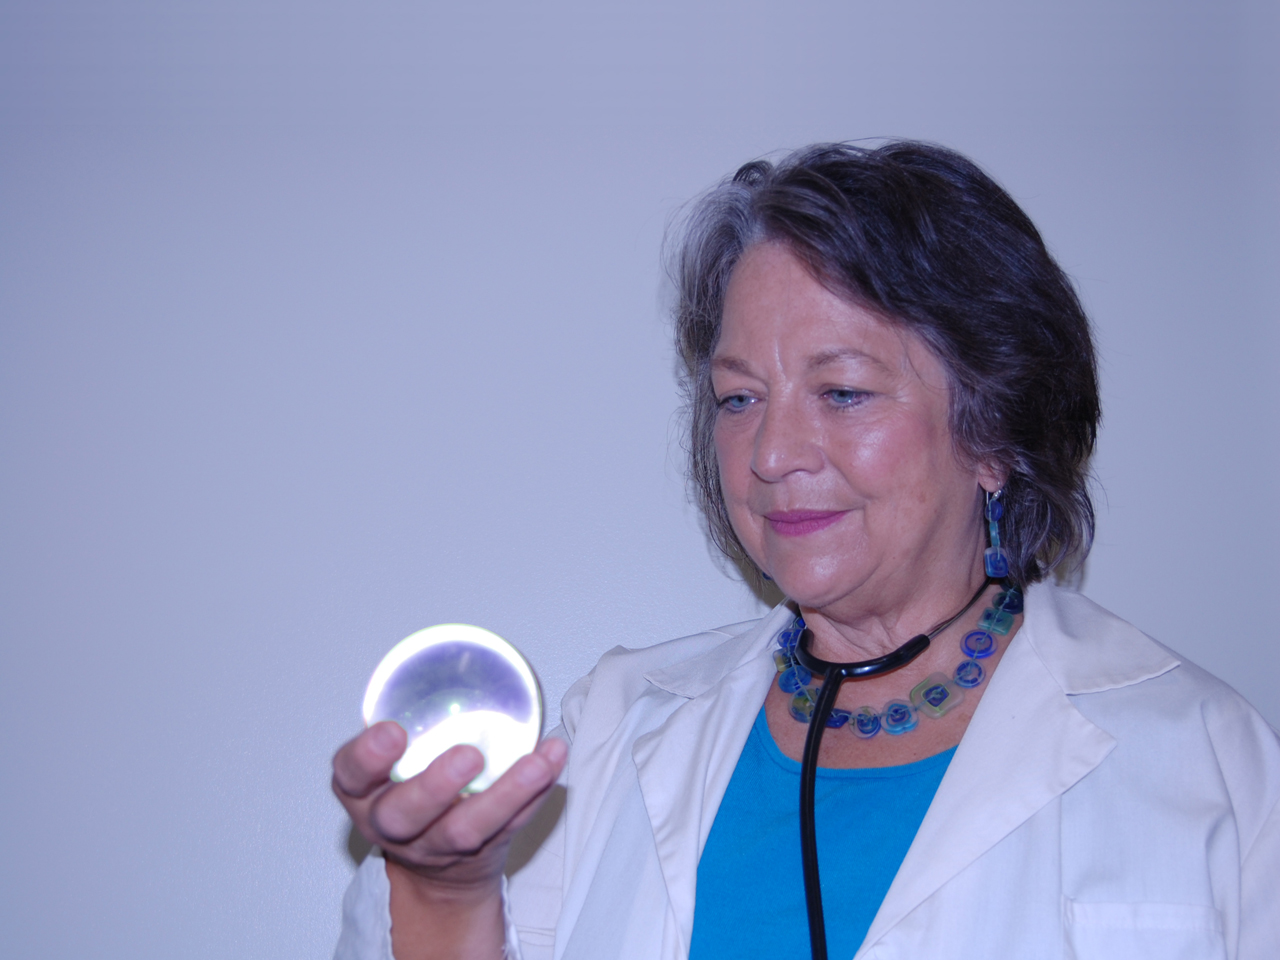 A white woman with grey hair and blue eyes wearing blue jewelry, a turquoise shirt and white lab coat, holding a glass orb with a stethescope around her neck